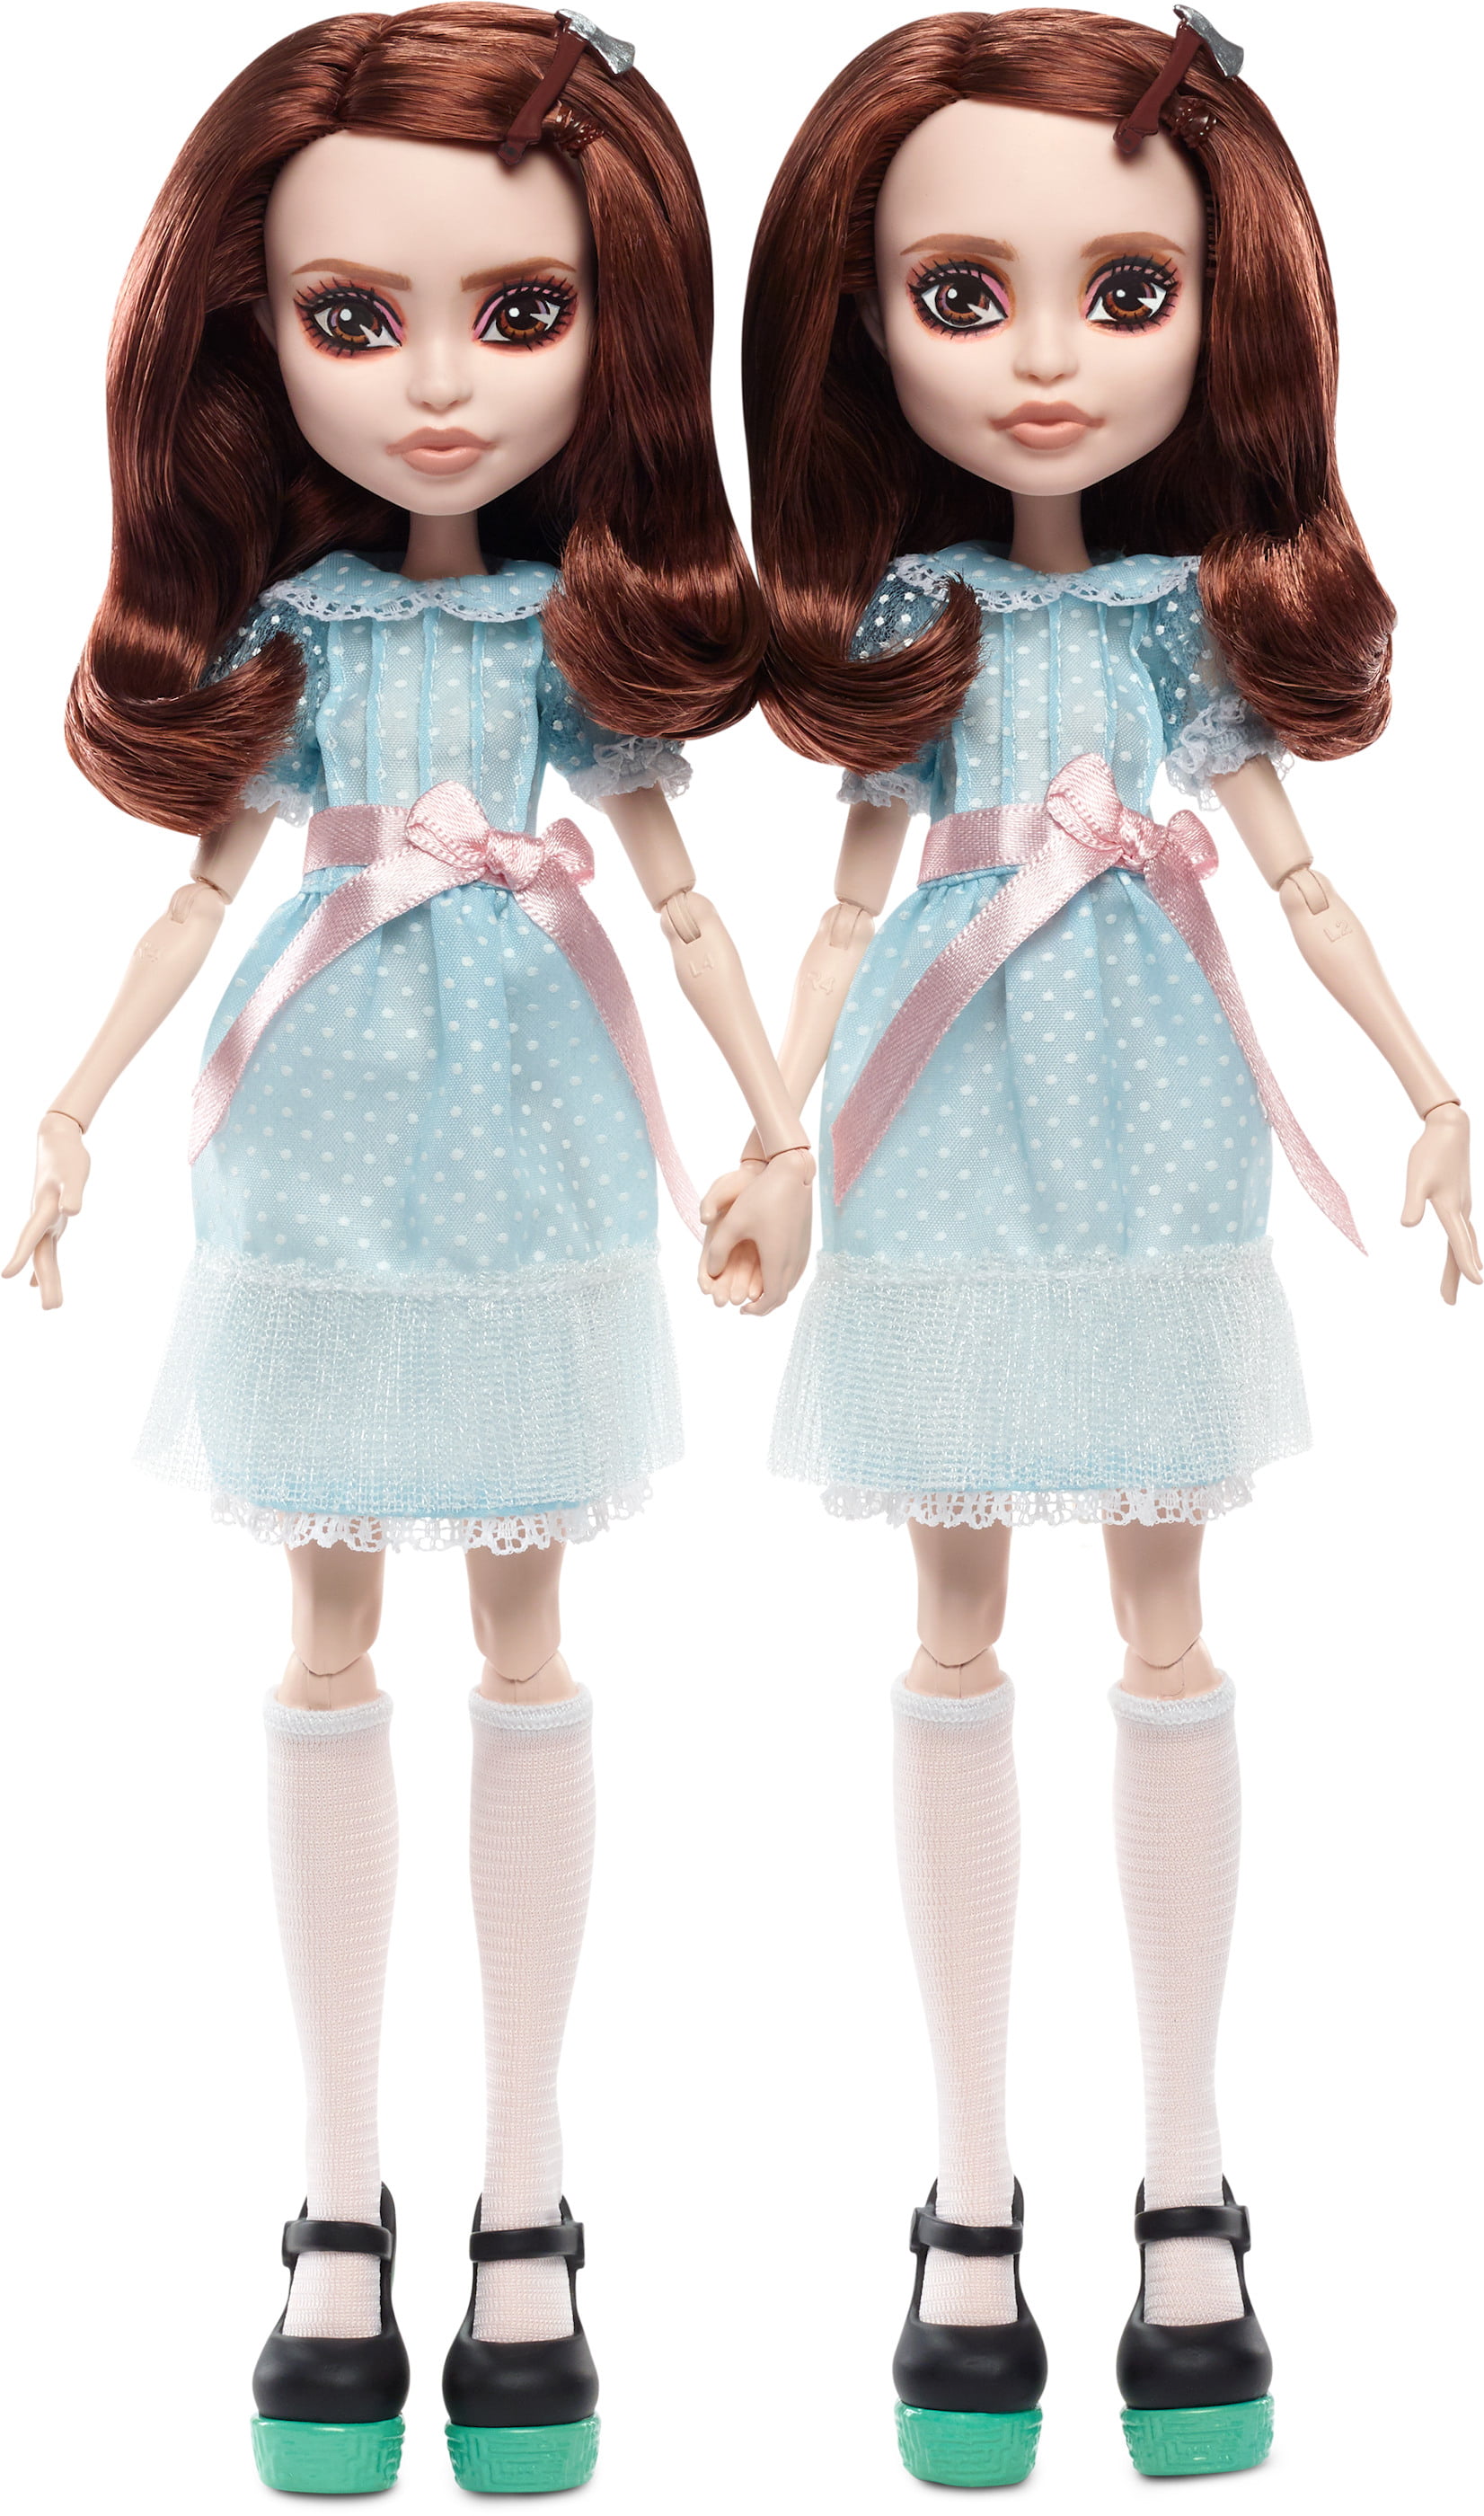 FREE SHIPPING The Shining Grady Twins Collector Doll 2-Pack 10-Inch